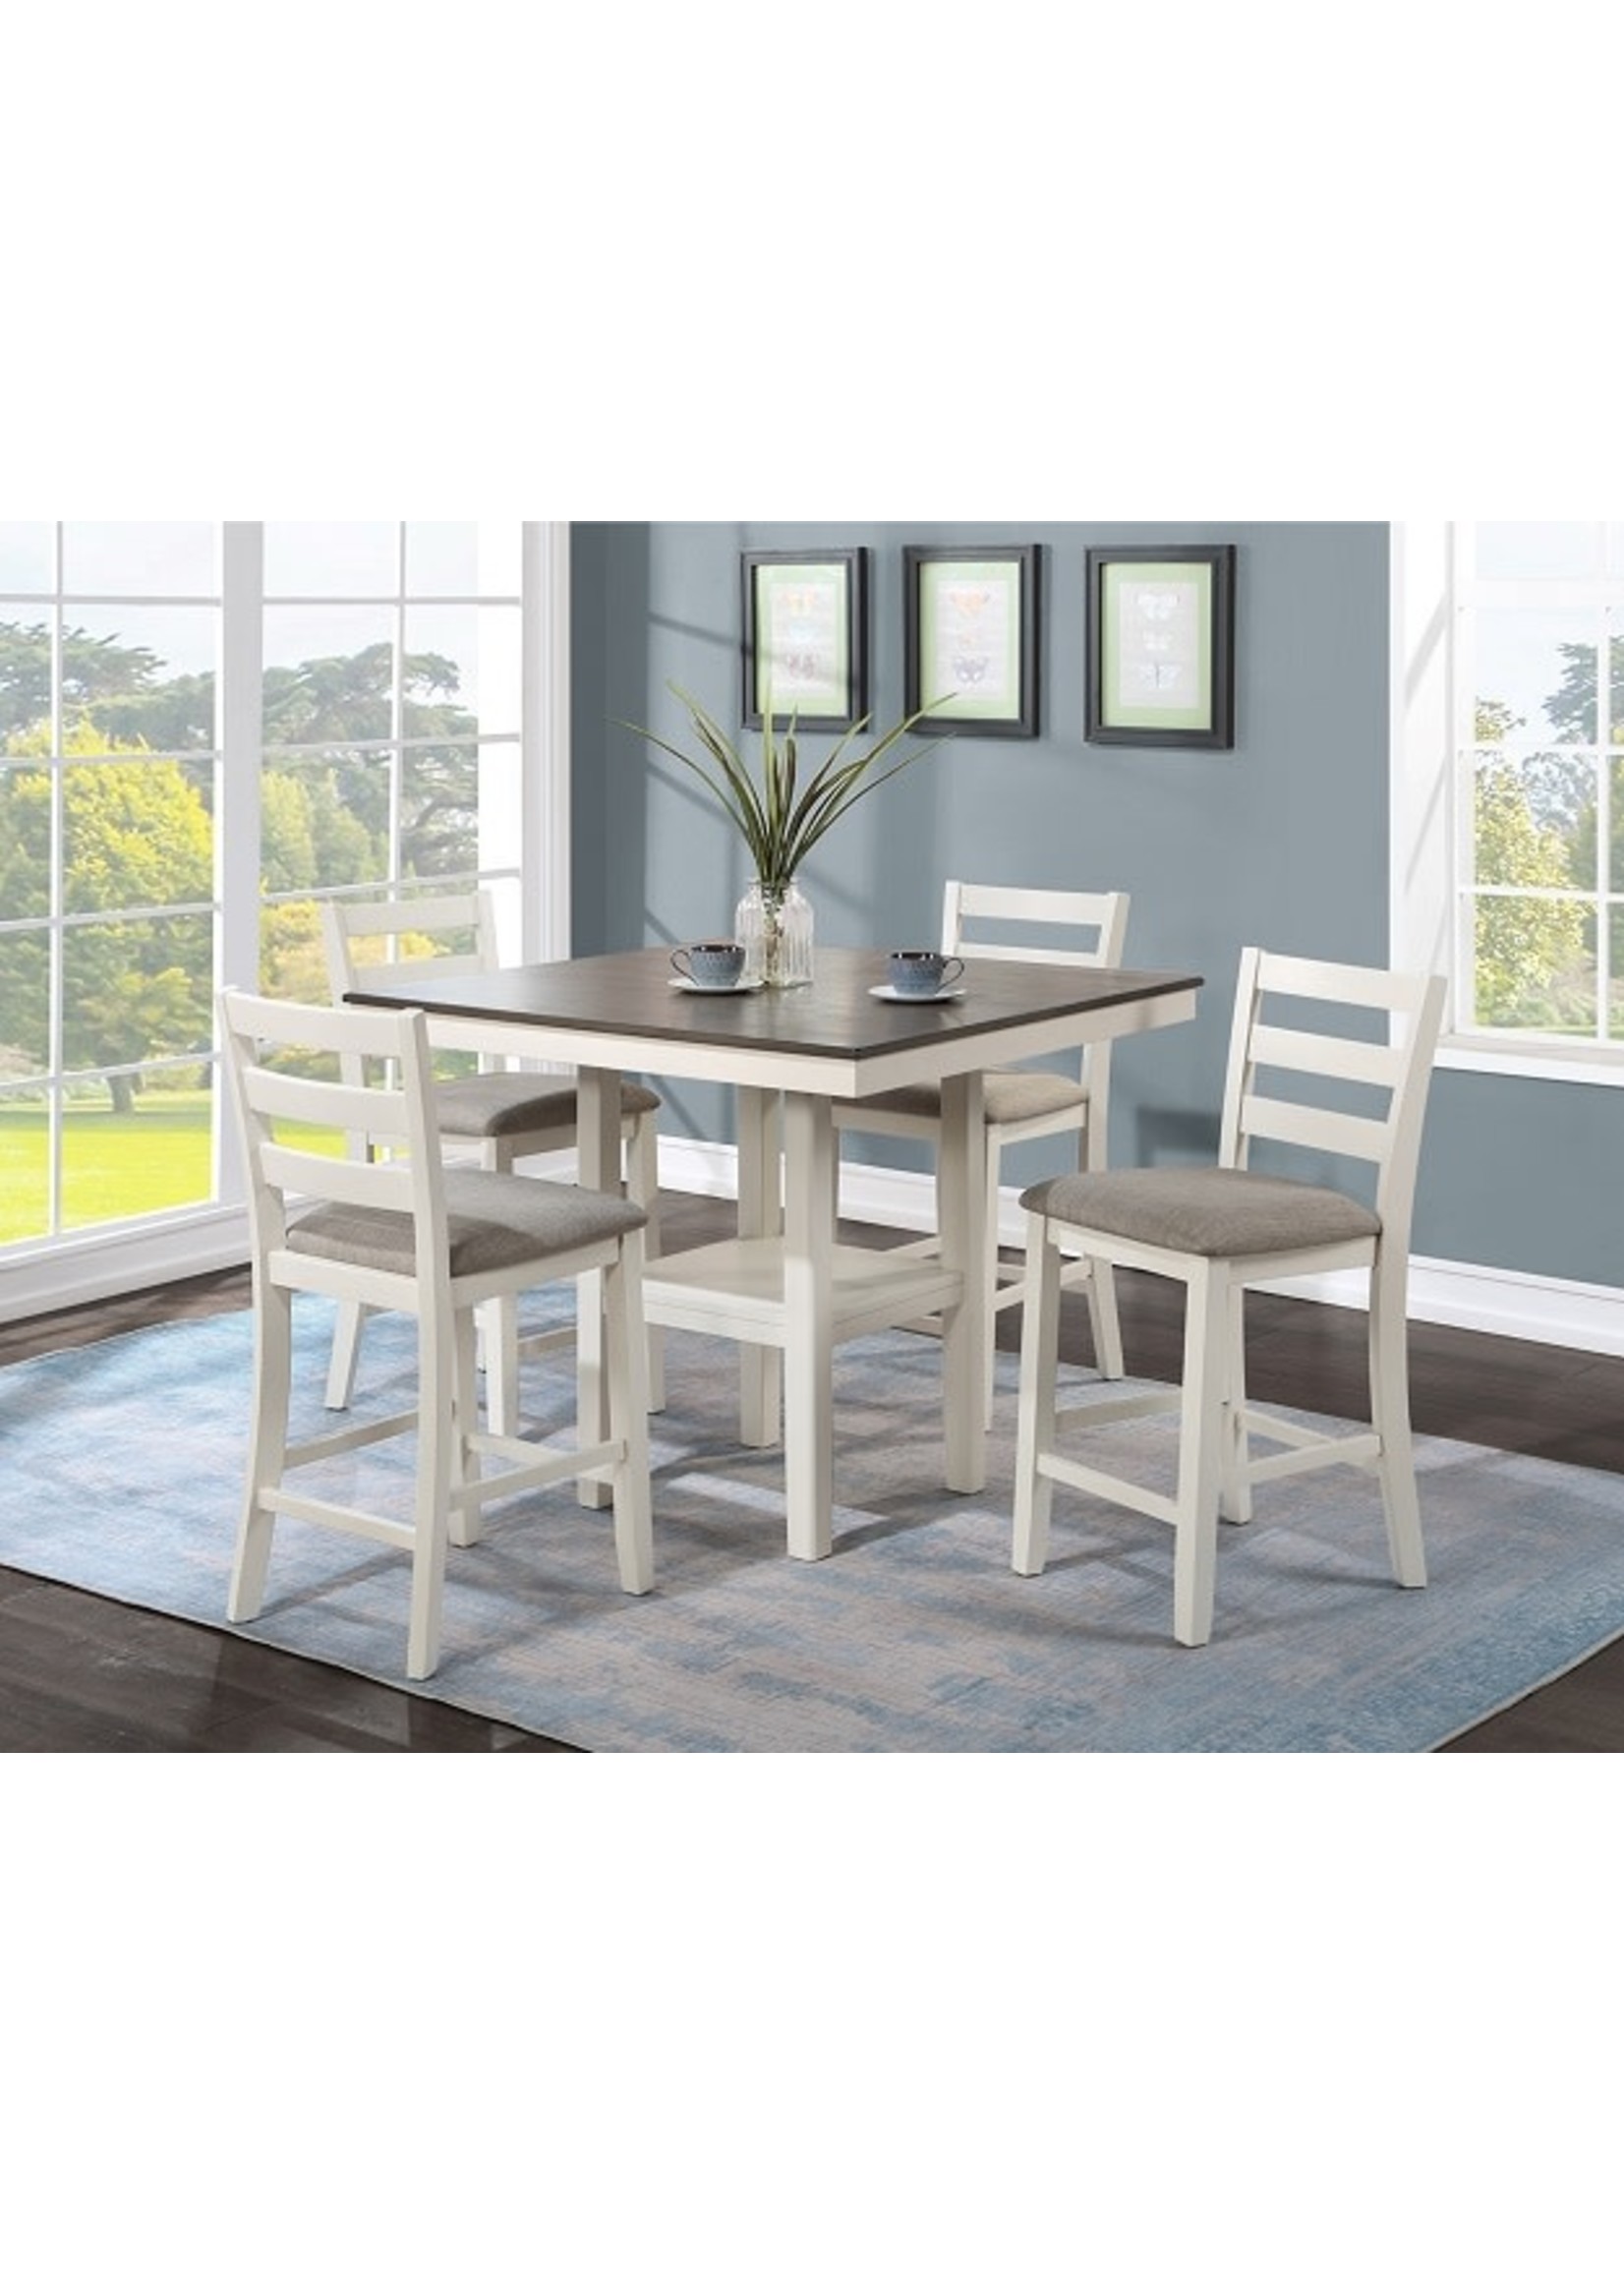 2630-CG COUNTER HIGH DINETTE PC TAHOE CHALK GREY Tree House Furniture